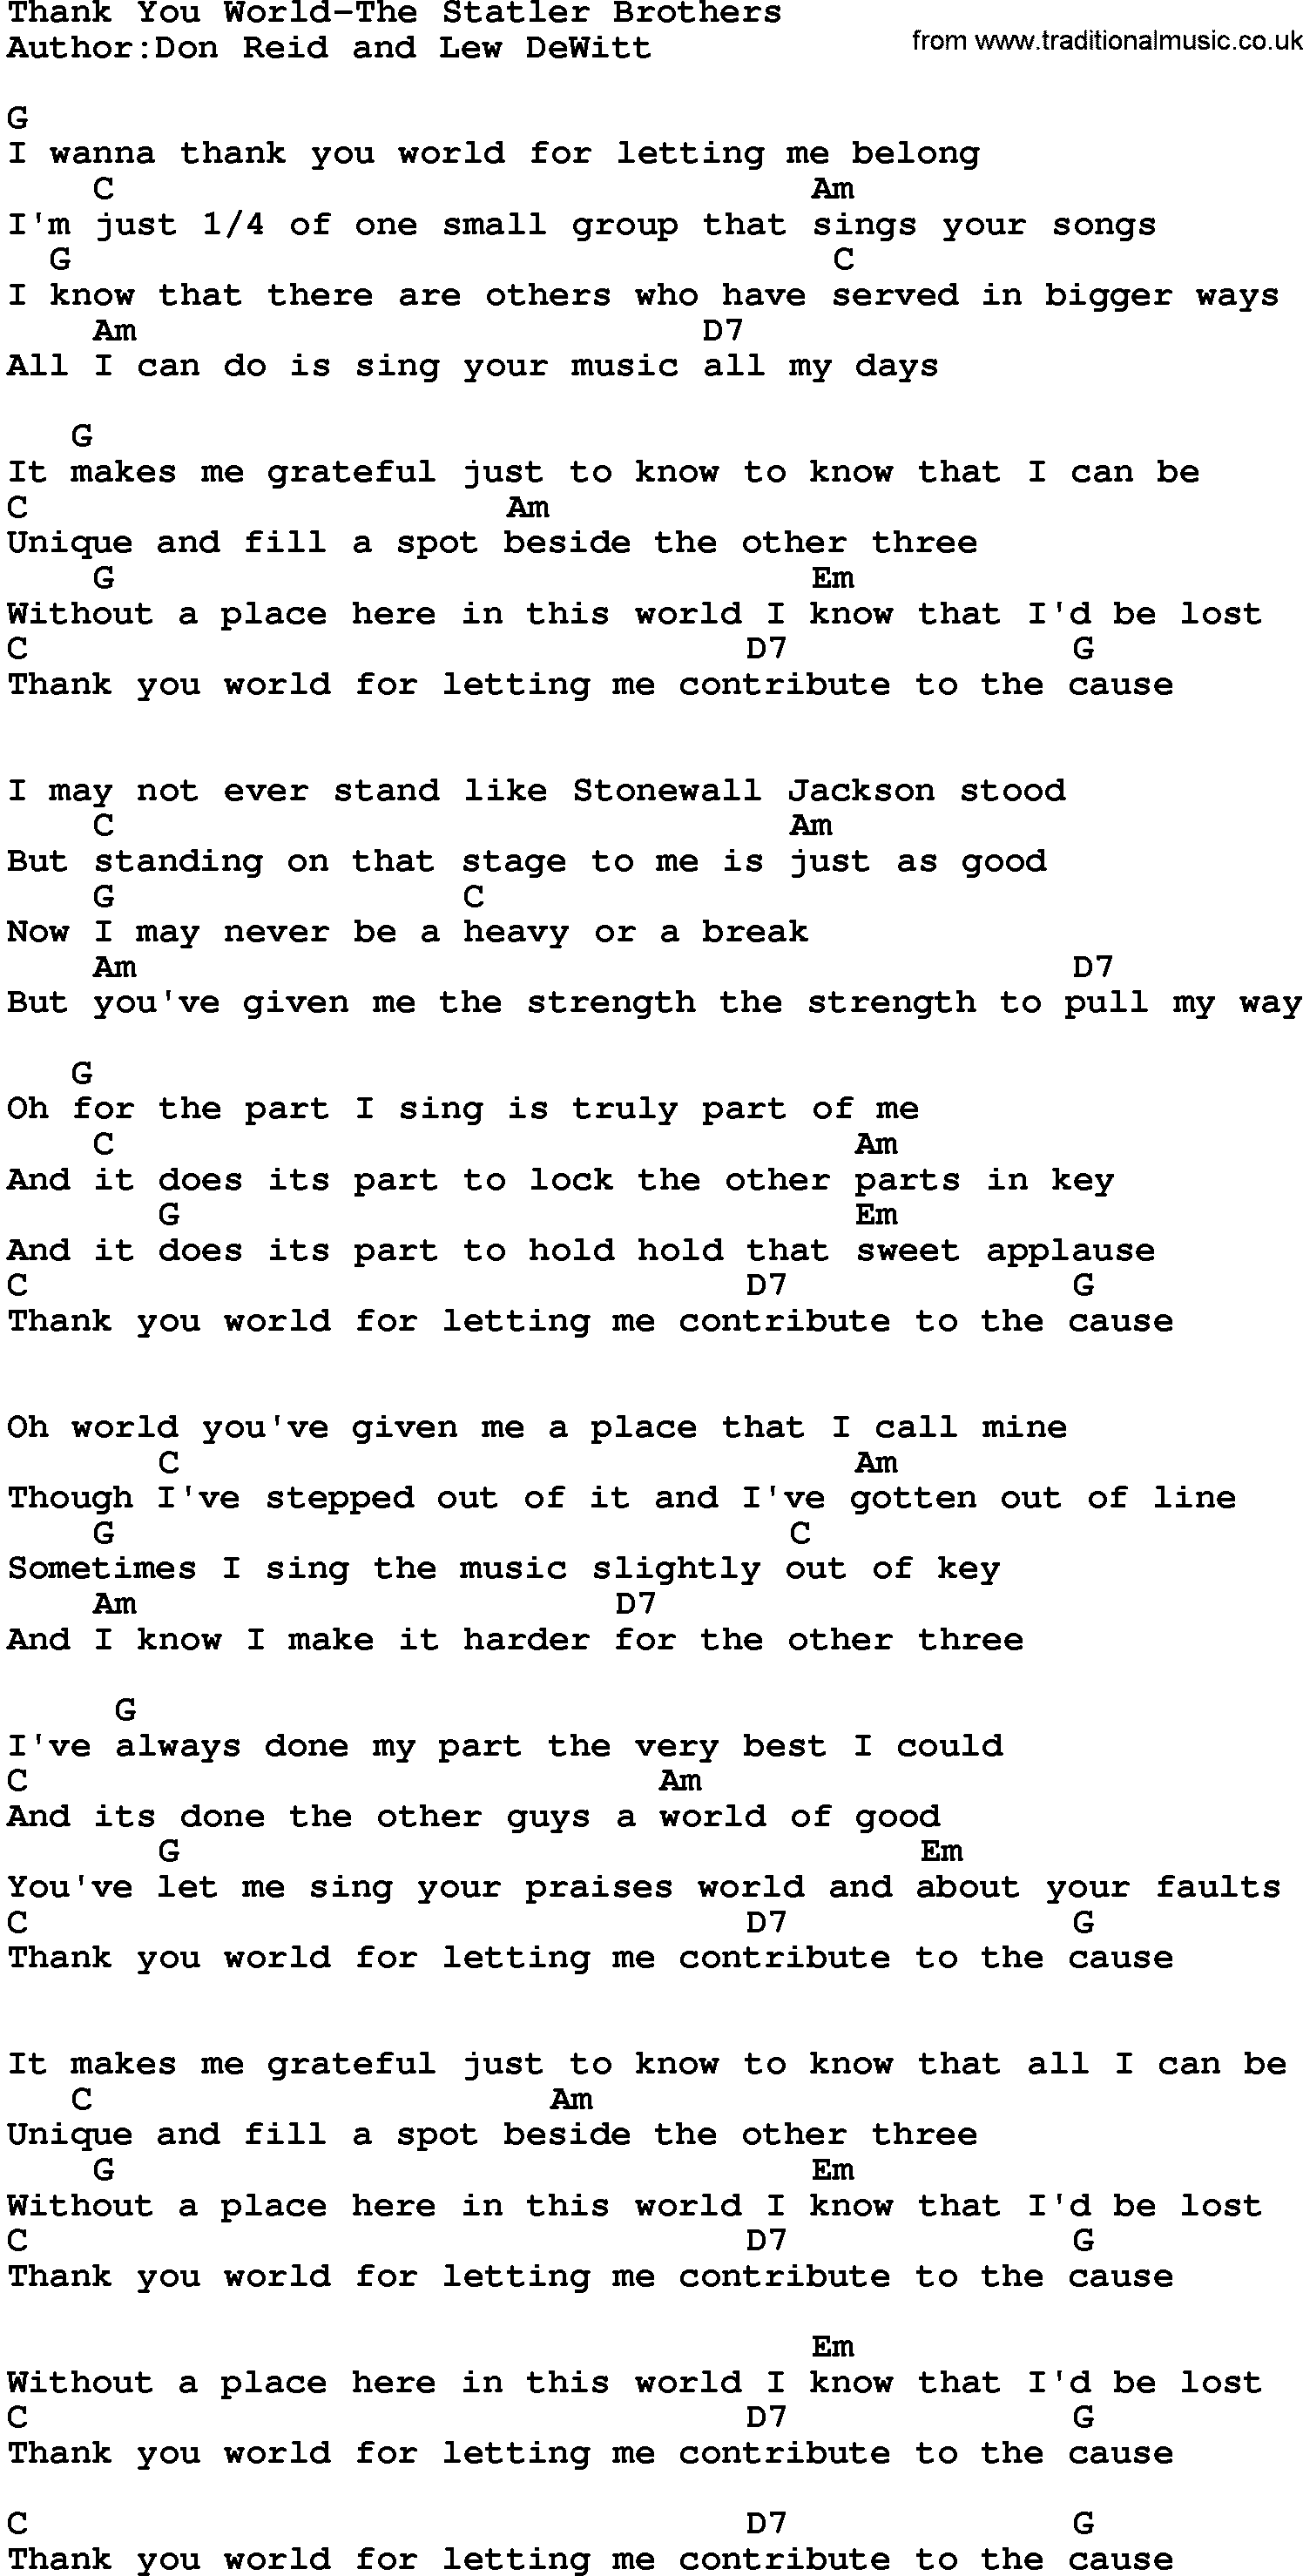 Thank you for the music is a song by the swedish pop group abba. Country Music Thank You World The Statler Brothers Lyrics And Chords